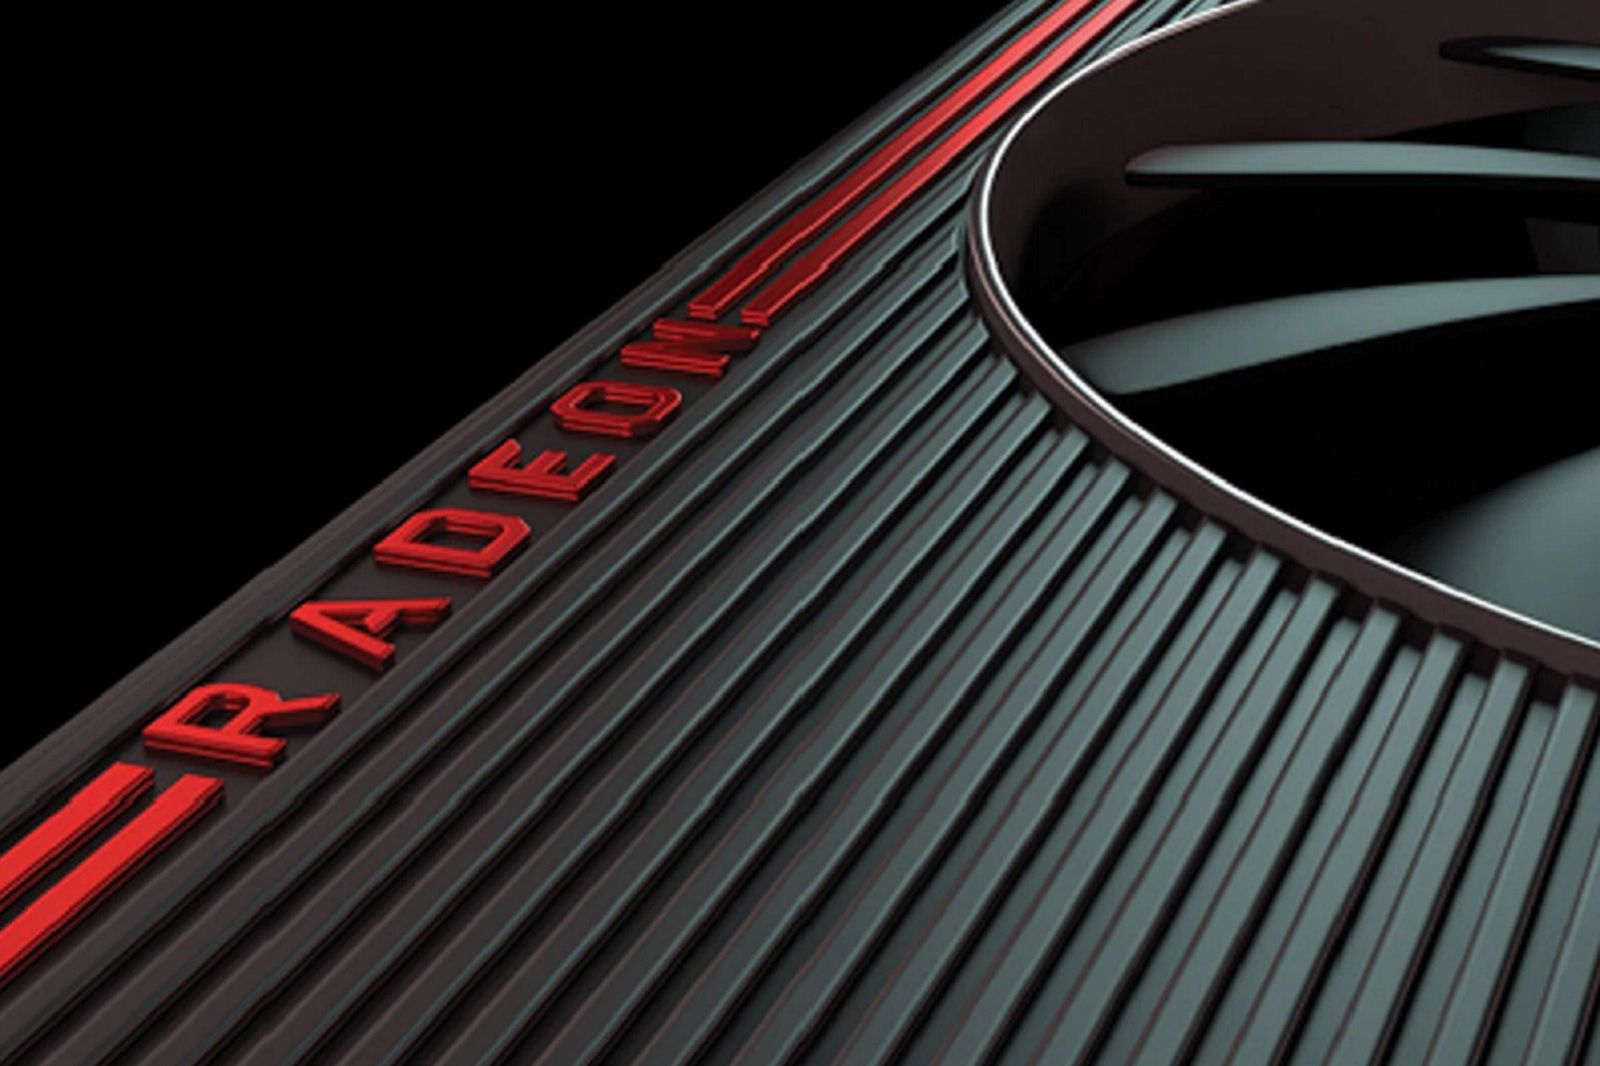 AMD is adding support for GPU scheduling to improve gaming performance photo 3